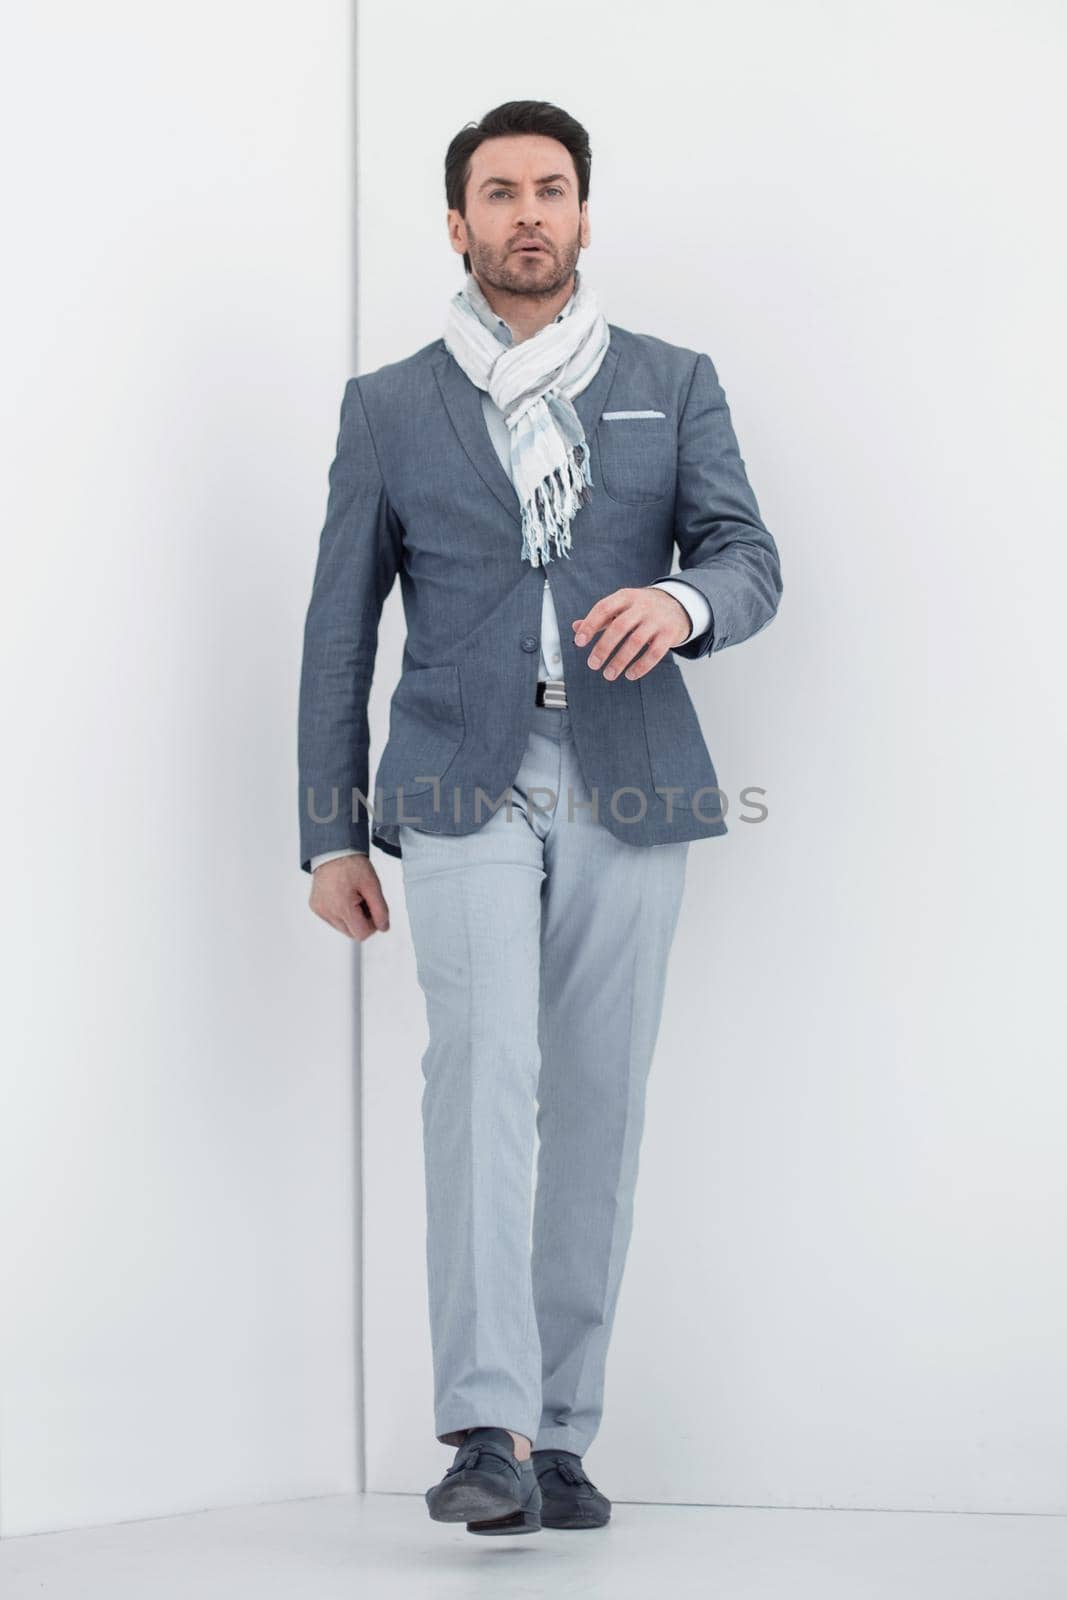 full height.confident business man.isolated on light background